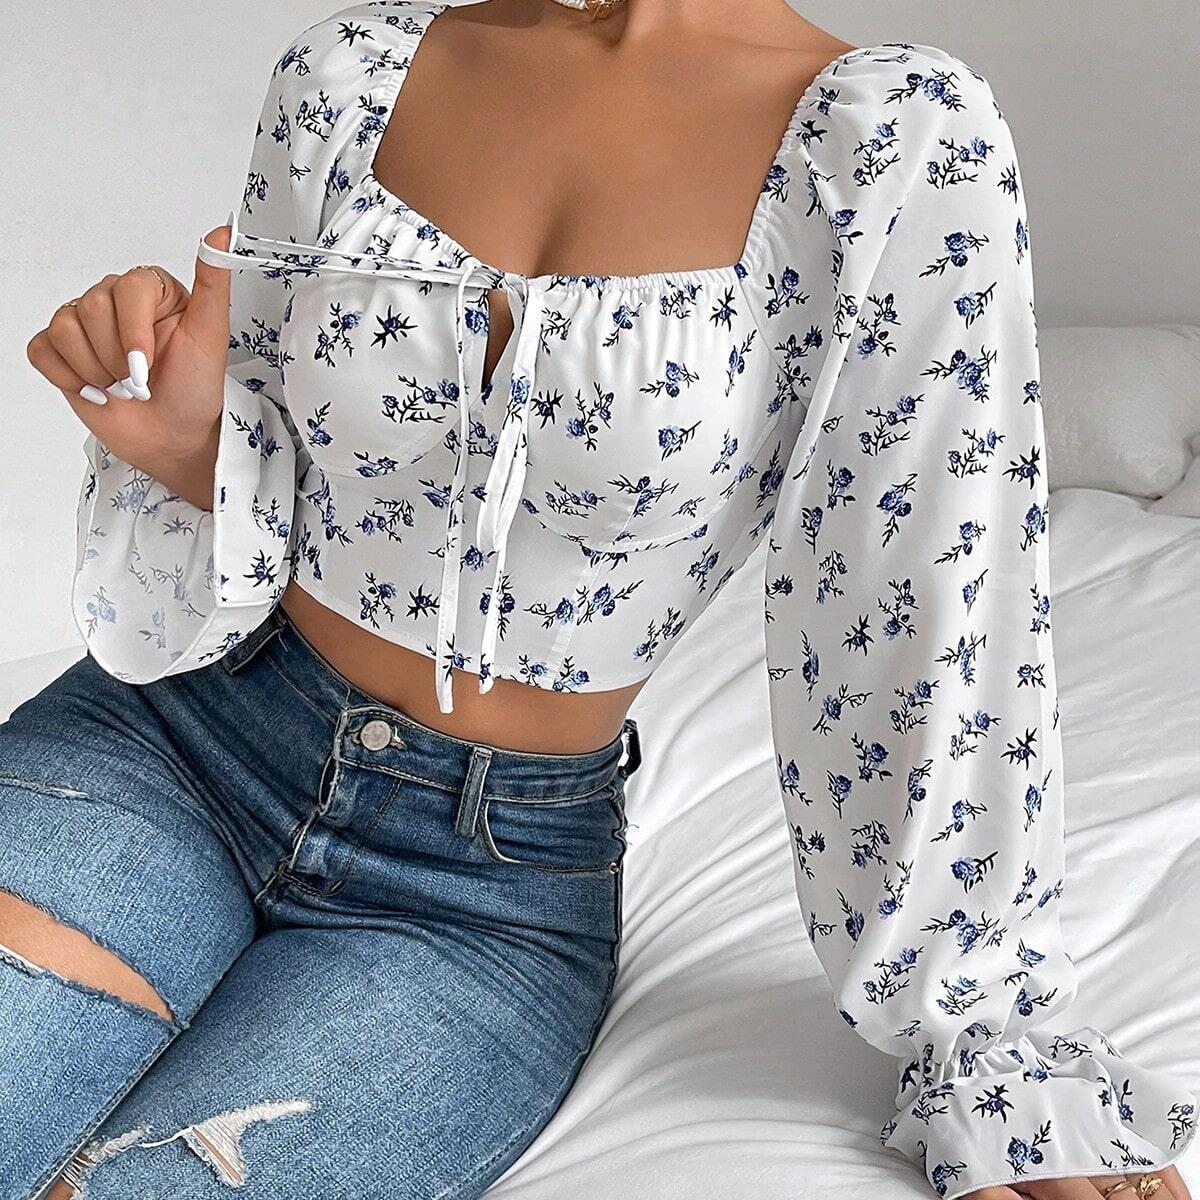 Sexy Square Neckline Short Top Shirts for Women